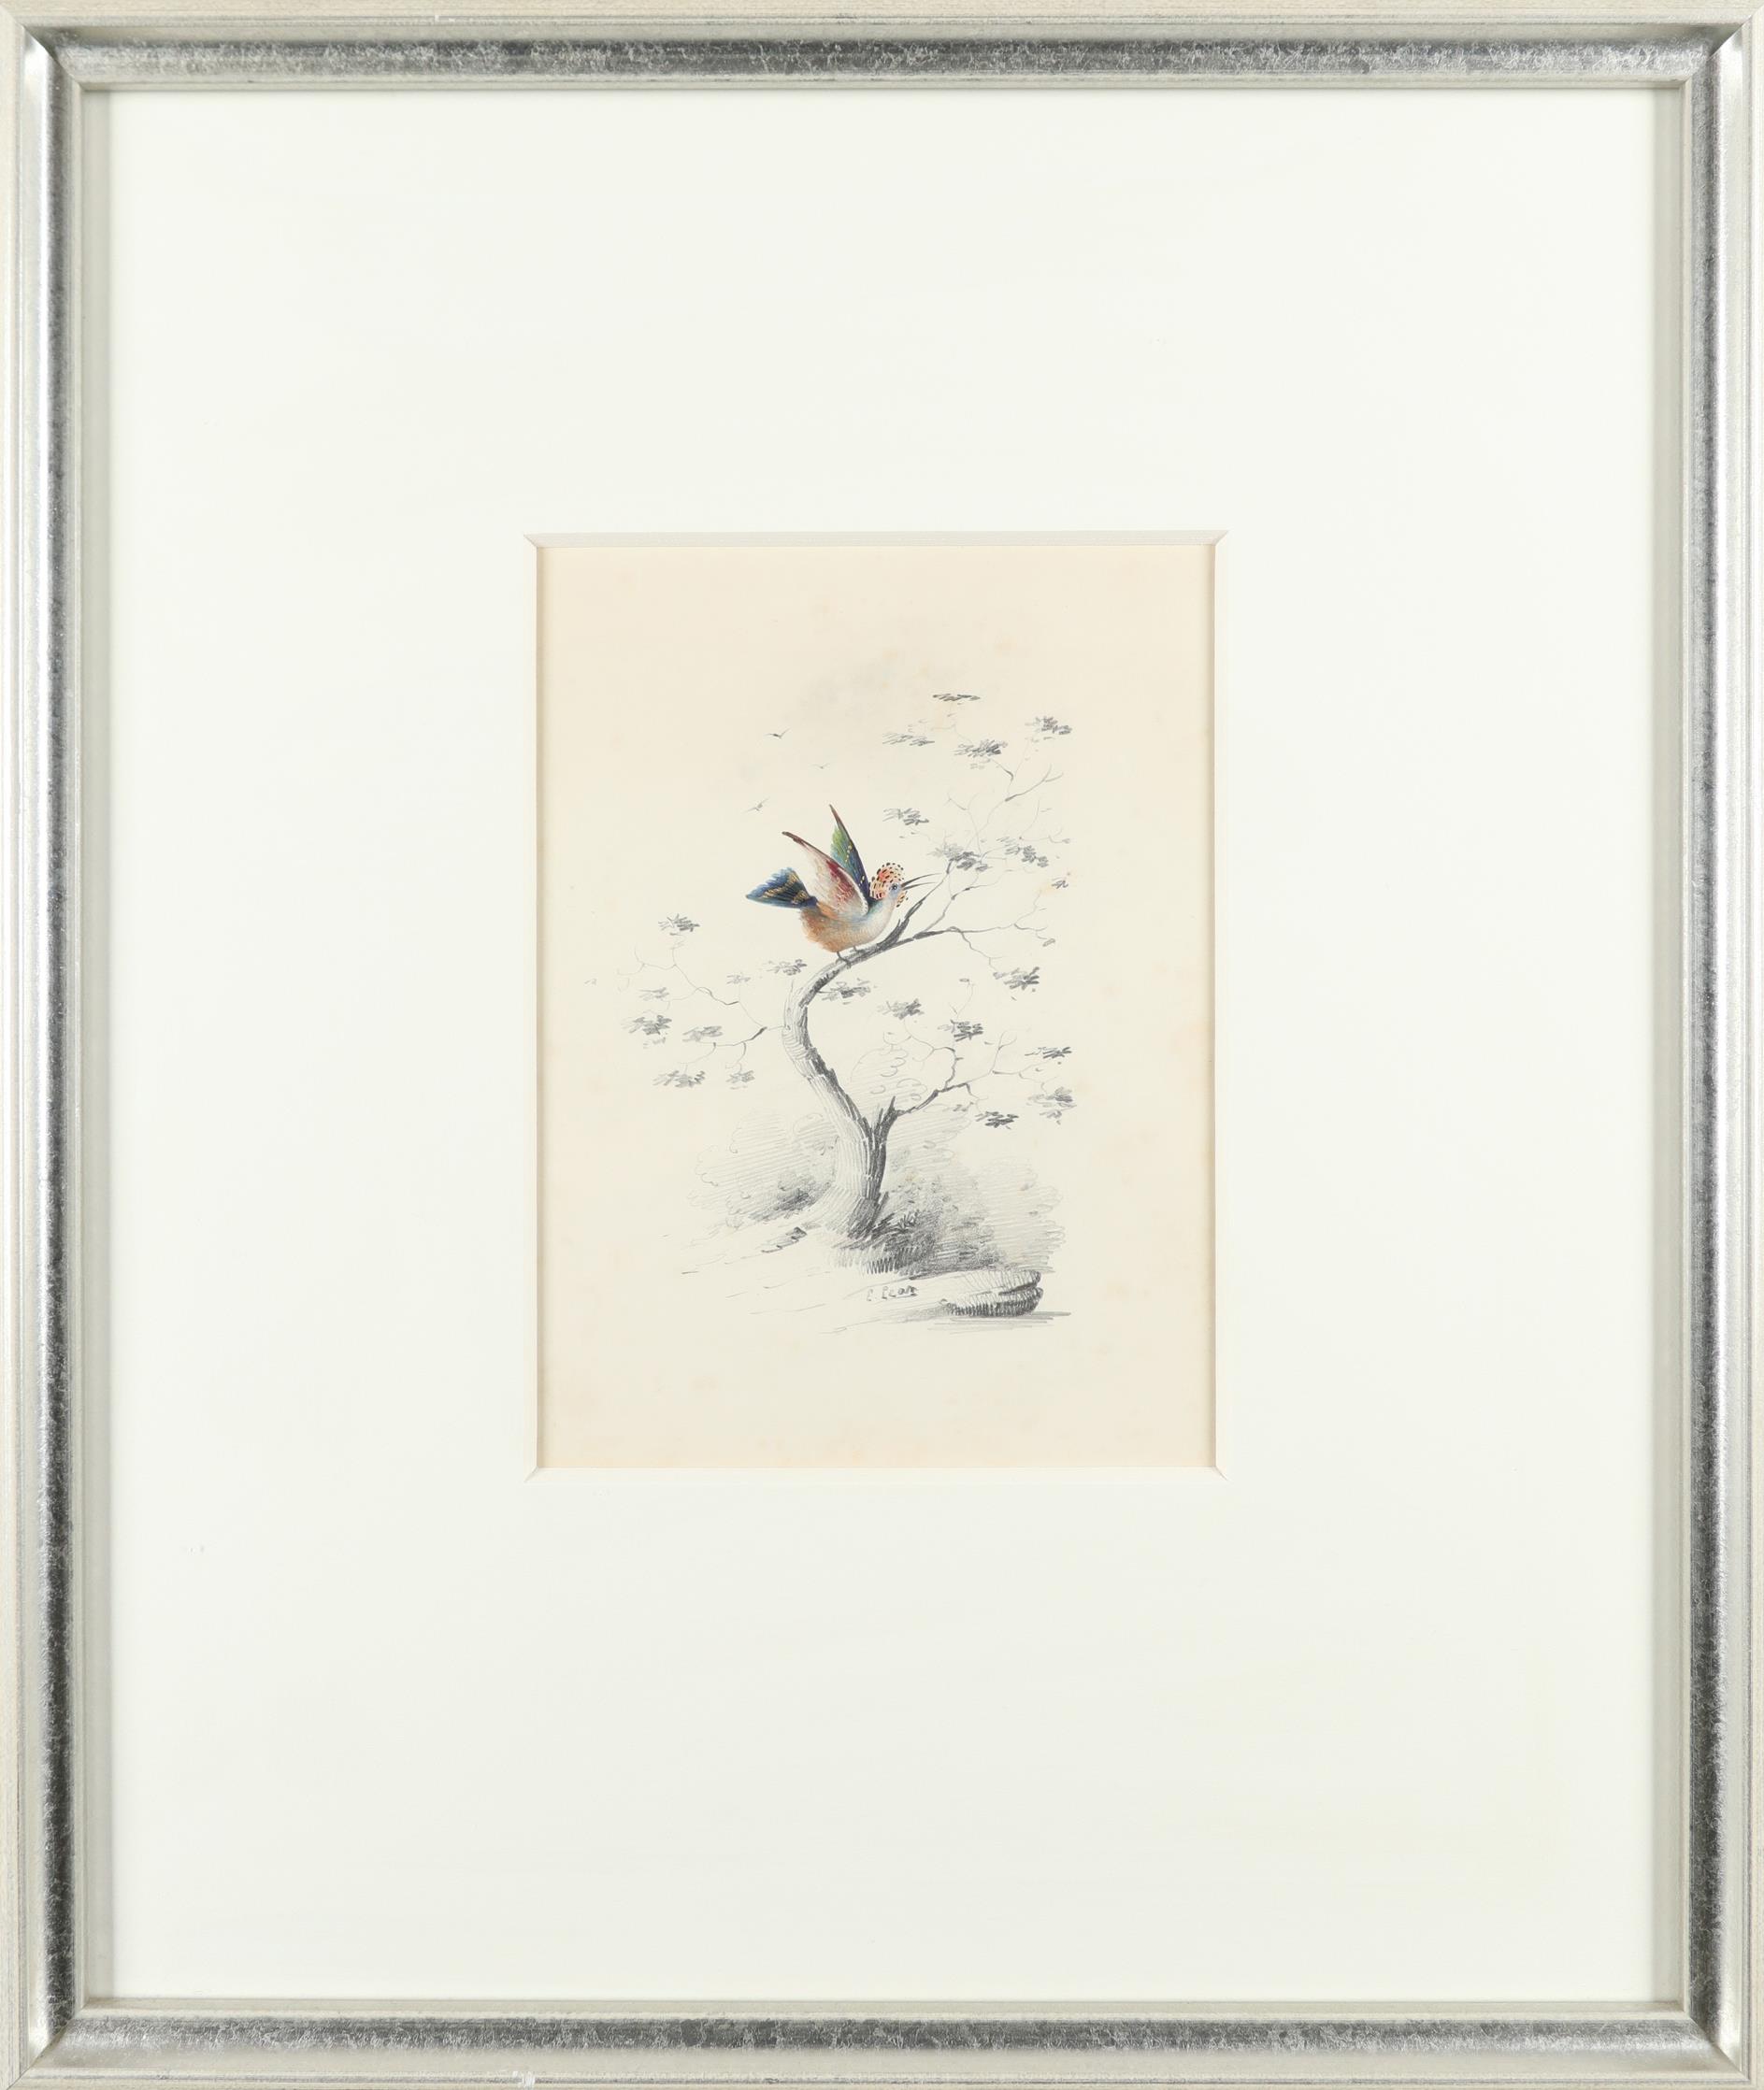 Edward Lear (1812-1888) Crested bird on a branch Signed E.Lear (lower centre) Pencil and - Image 2 of 3